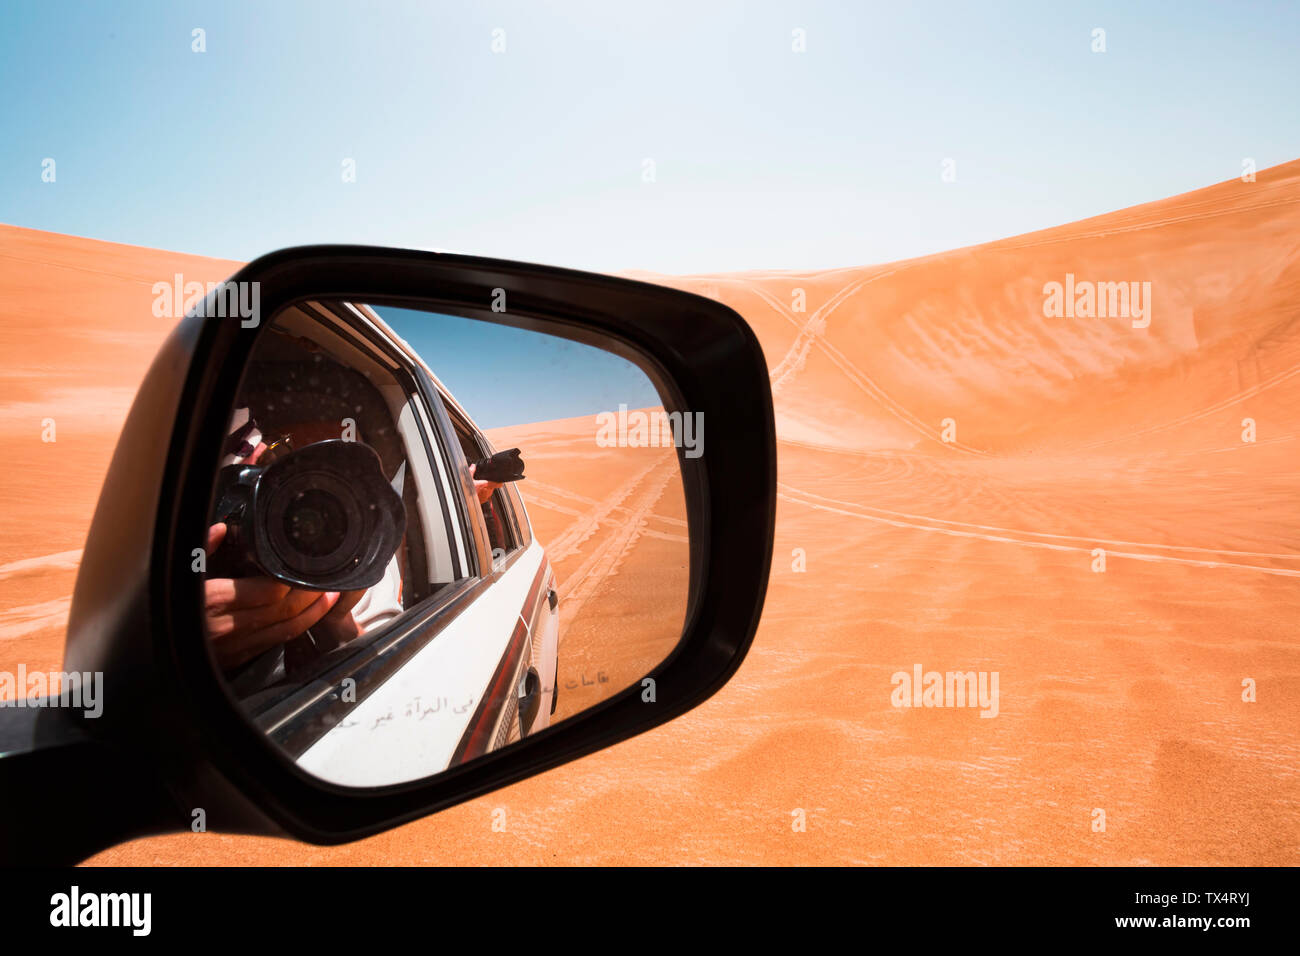 Mirror image of a man taking pictures from a off-road vehicle, Oman, Wahiba Sands Stock Photo